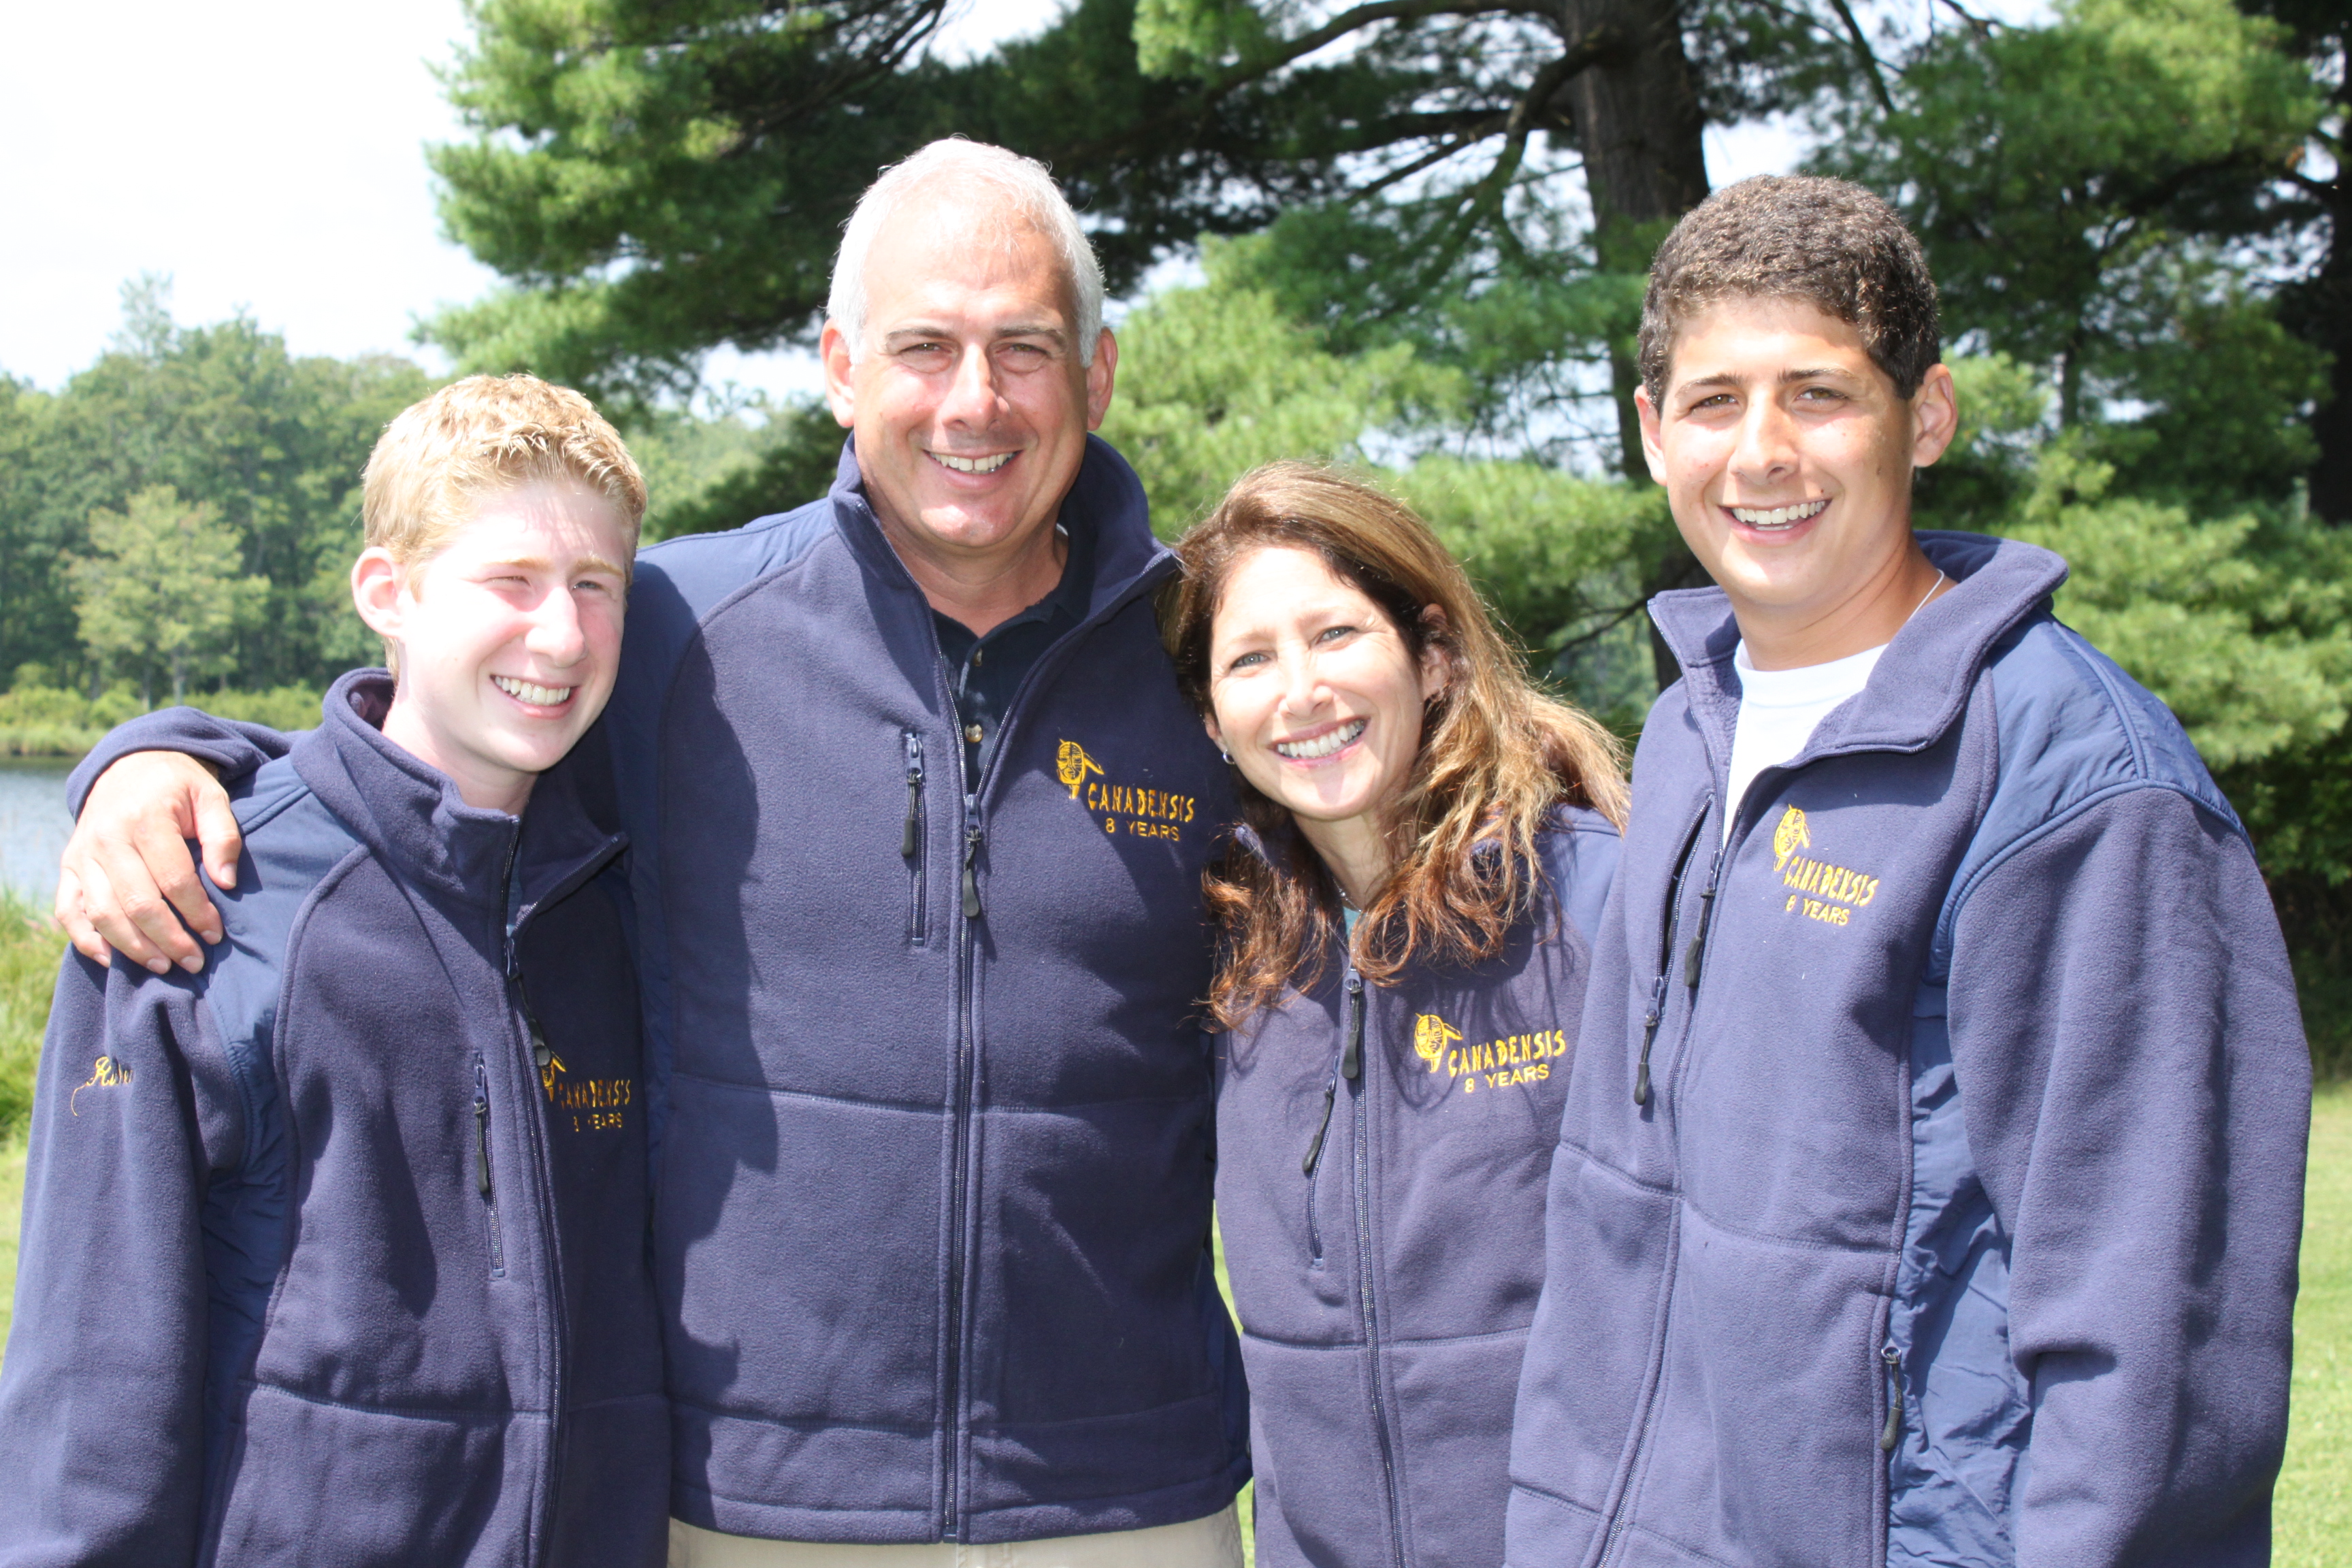 Ken with Audrey, Dan and Greg.  All four received their 8-year jackets in Summer '09.  Thanks for everything Ken!